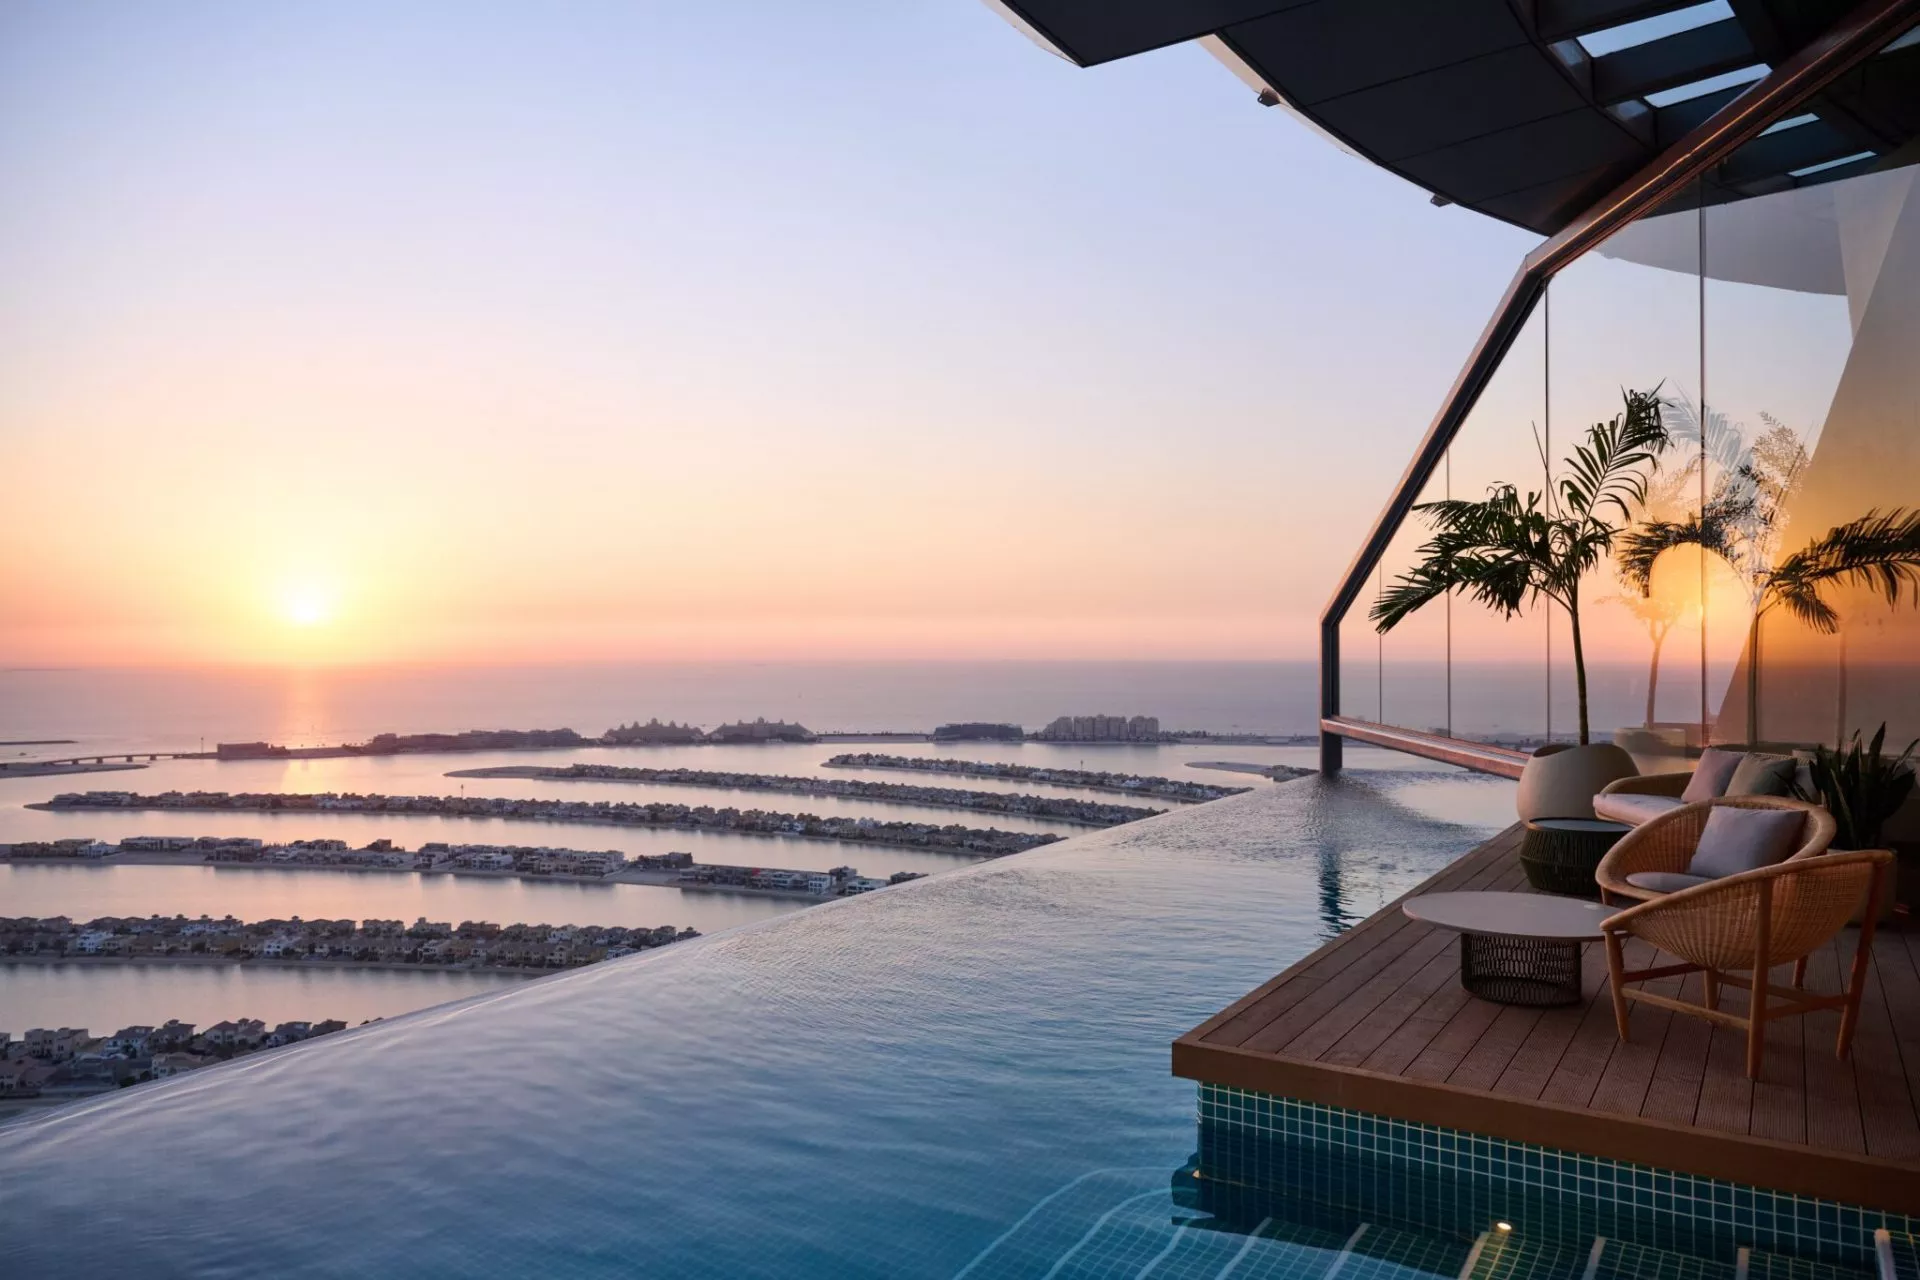 Aura SkyPool Lounge in United Arab Emirates, Middle East | Observation Decks,Swimming - Rated 3.7